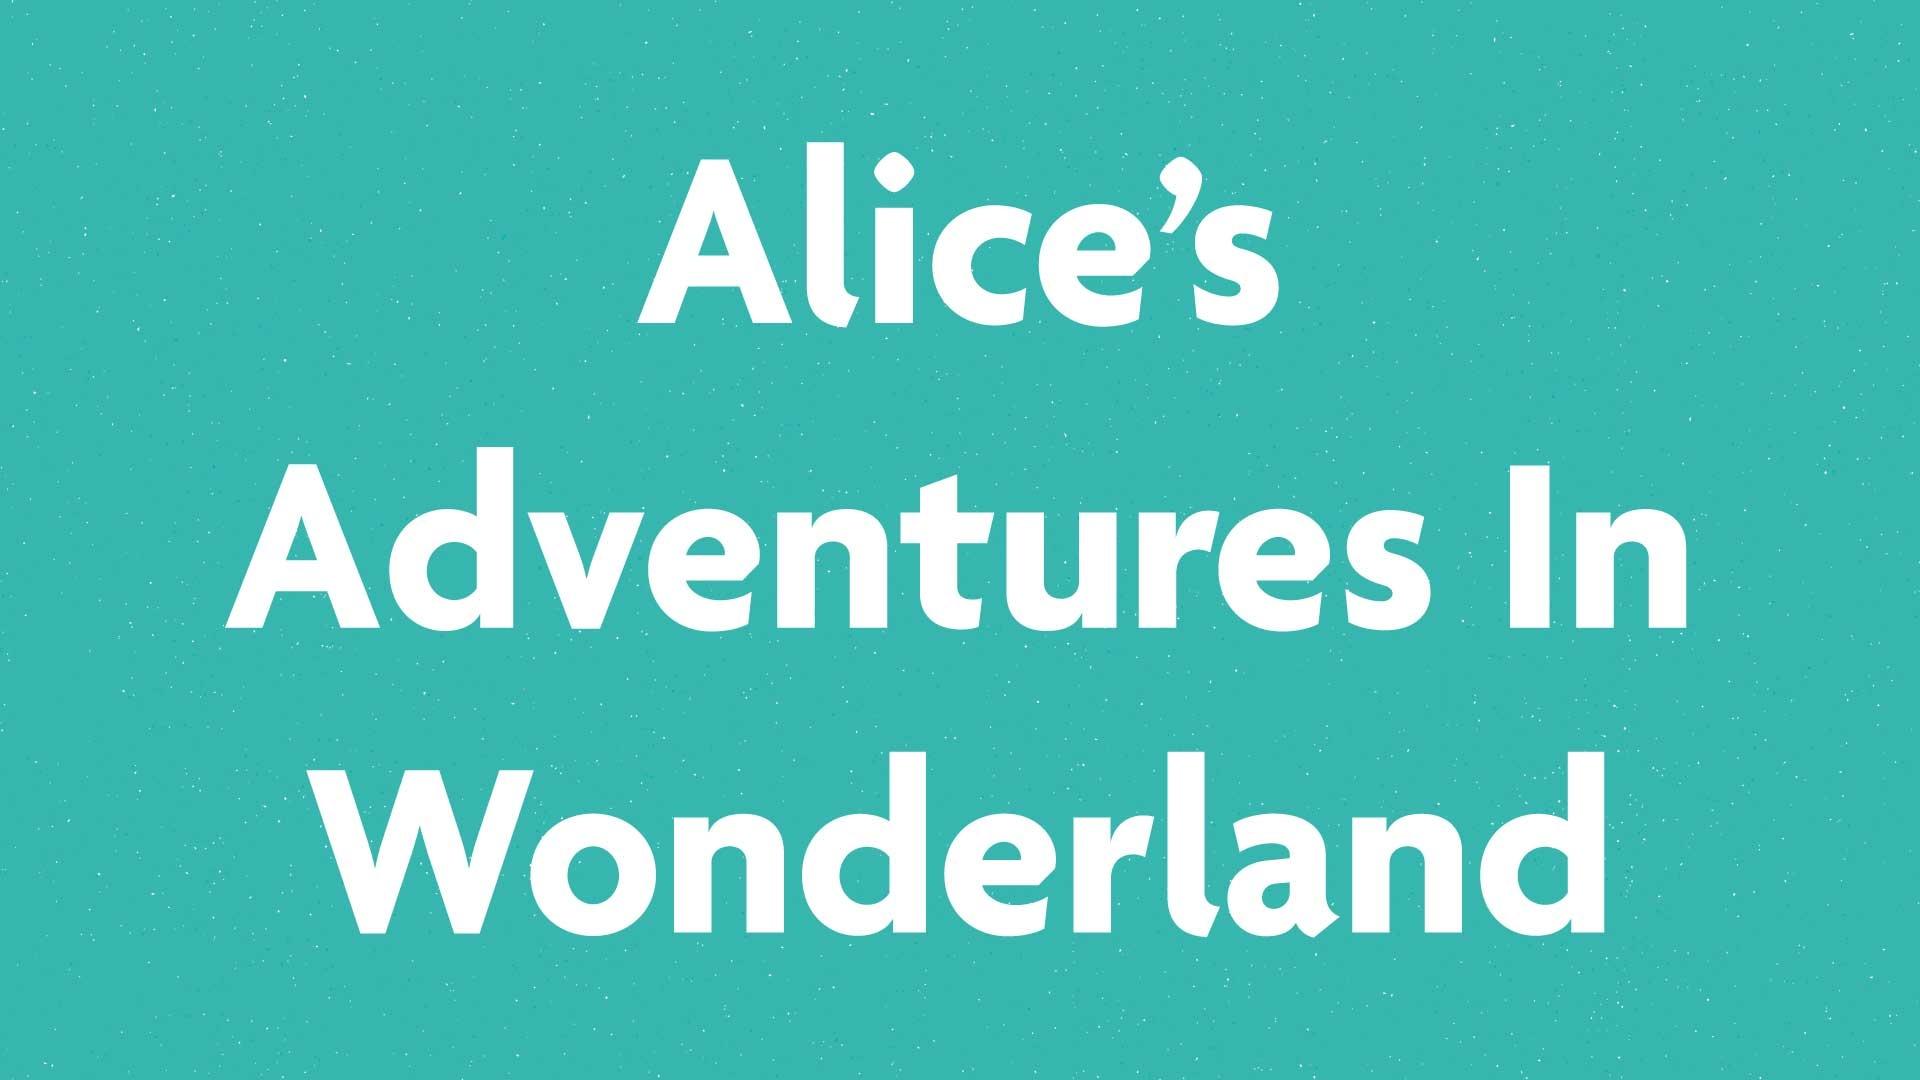 Alice's Adventure in Wonderland book submission card on a green background.